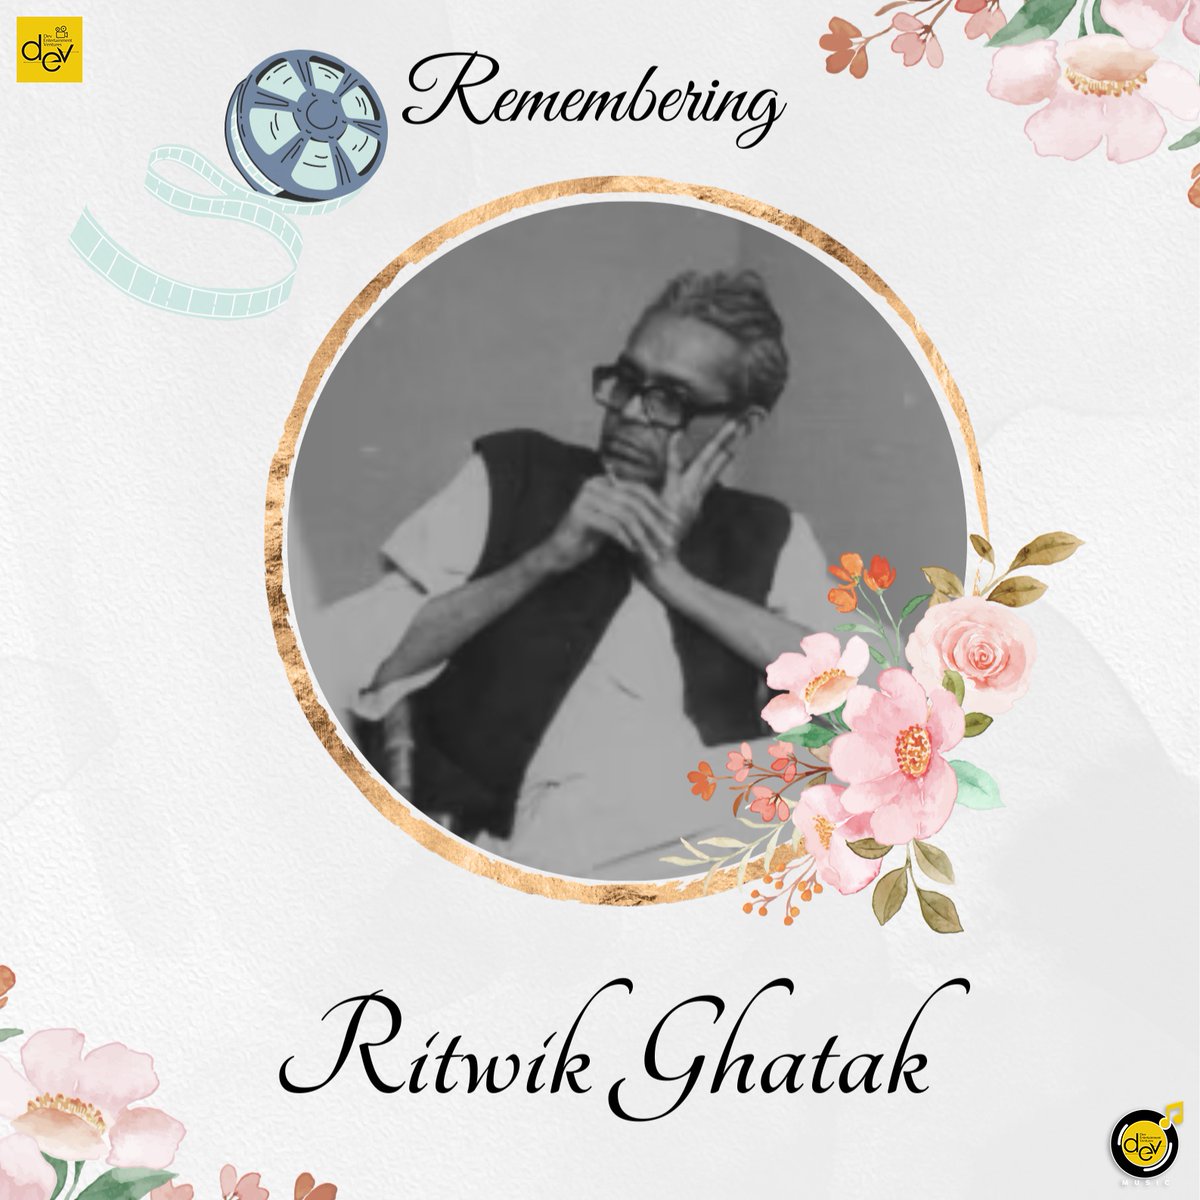 Remembering the visionary filmmaker Ritwik Ghatak on the occasion of his death anniversary. His cinematic brilliance continues to inspire and resonate with cinephiles worldwide. 🎬 #RememberingRitwikGhatak